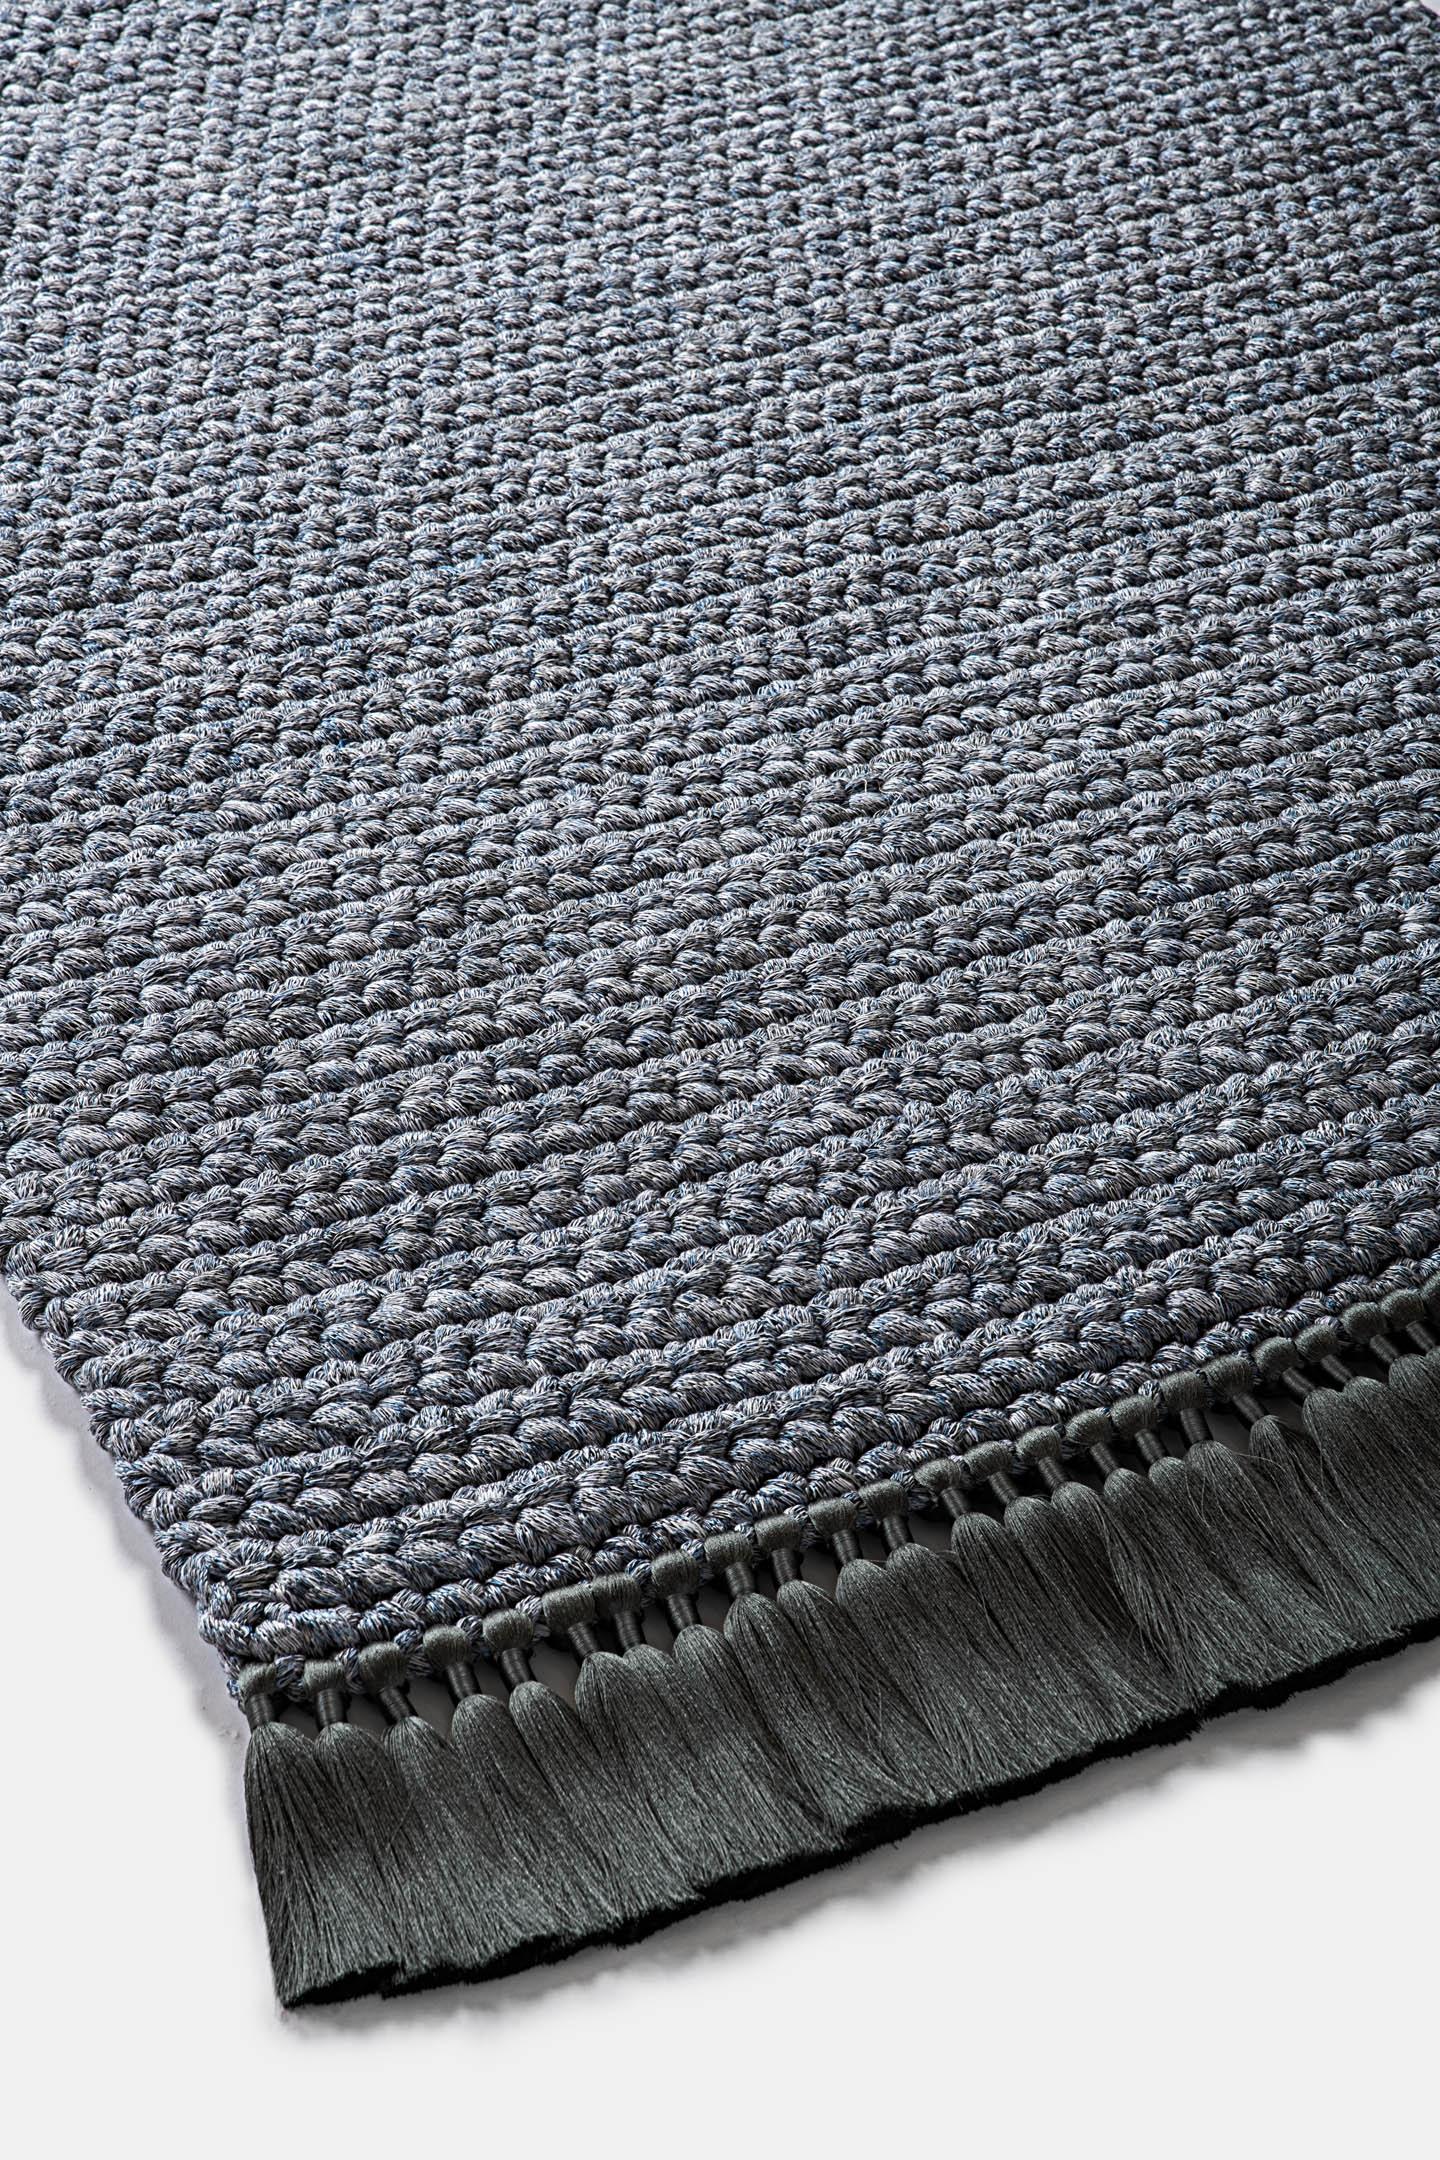 Handmade Crochet Thick Rug 120x200 cm in Blue Grey Colors with Grey Tassels In New Condition For Sale In Tel Aviv, IL